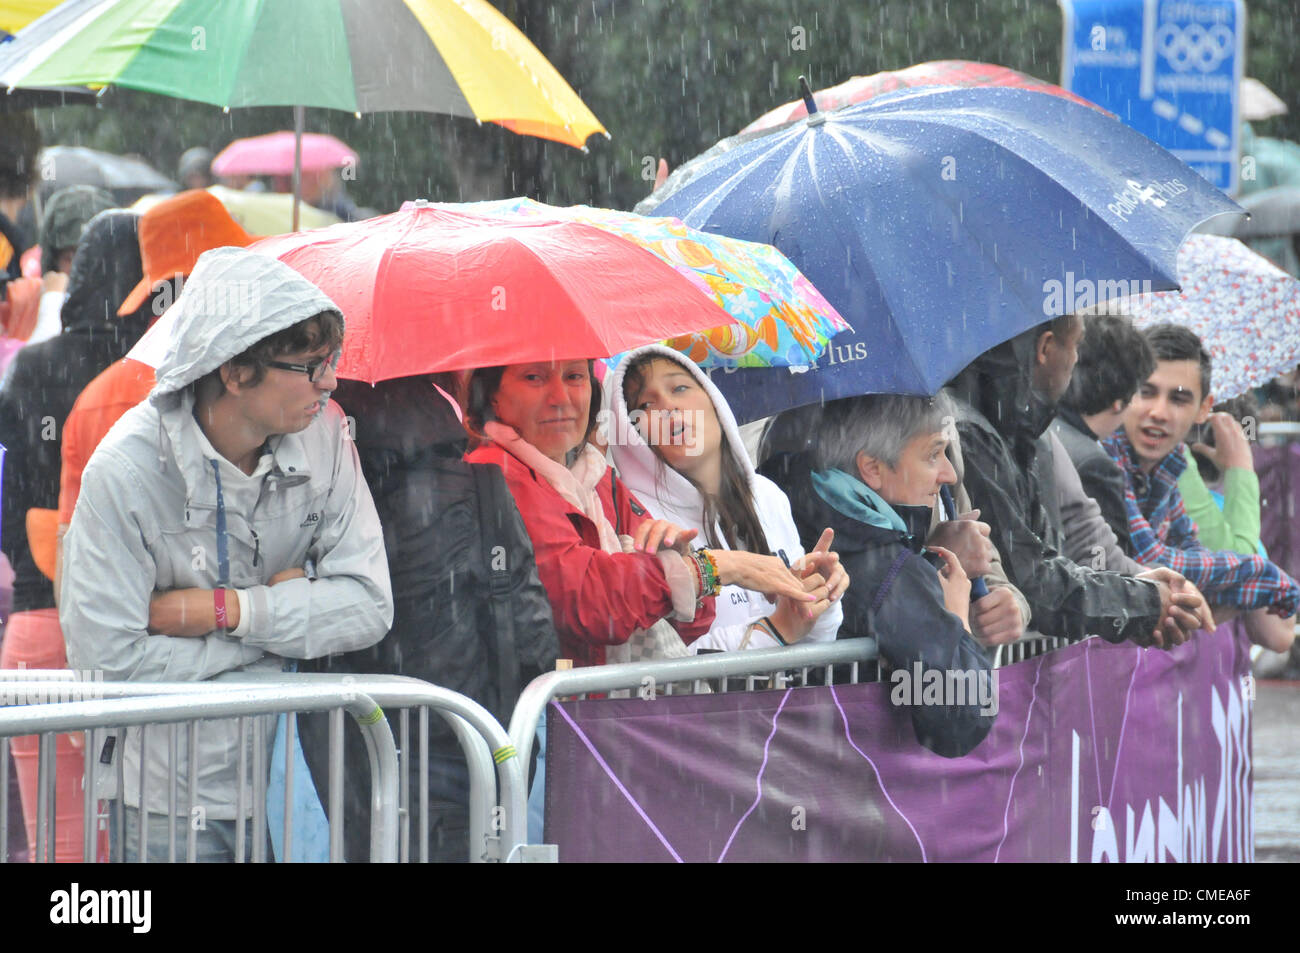 Hyde Park Corner, London, UK. 29th July 2012. The crowd try to stay dry as they watch the women's cycling road race at Hyde Park Corner as the race approaches the end as the riders and crowd endure heavy rain and a thunderstorm. Stock Photo